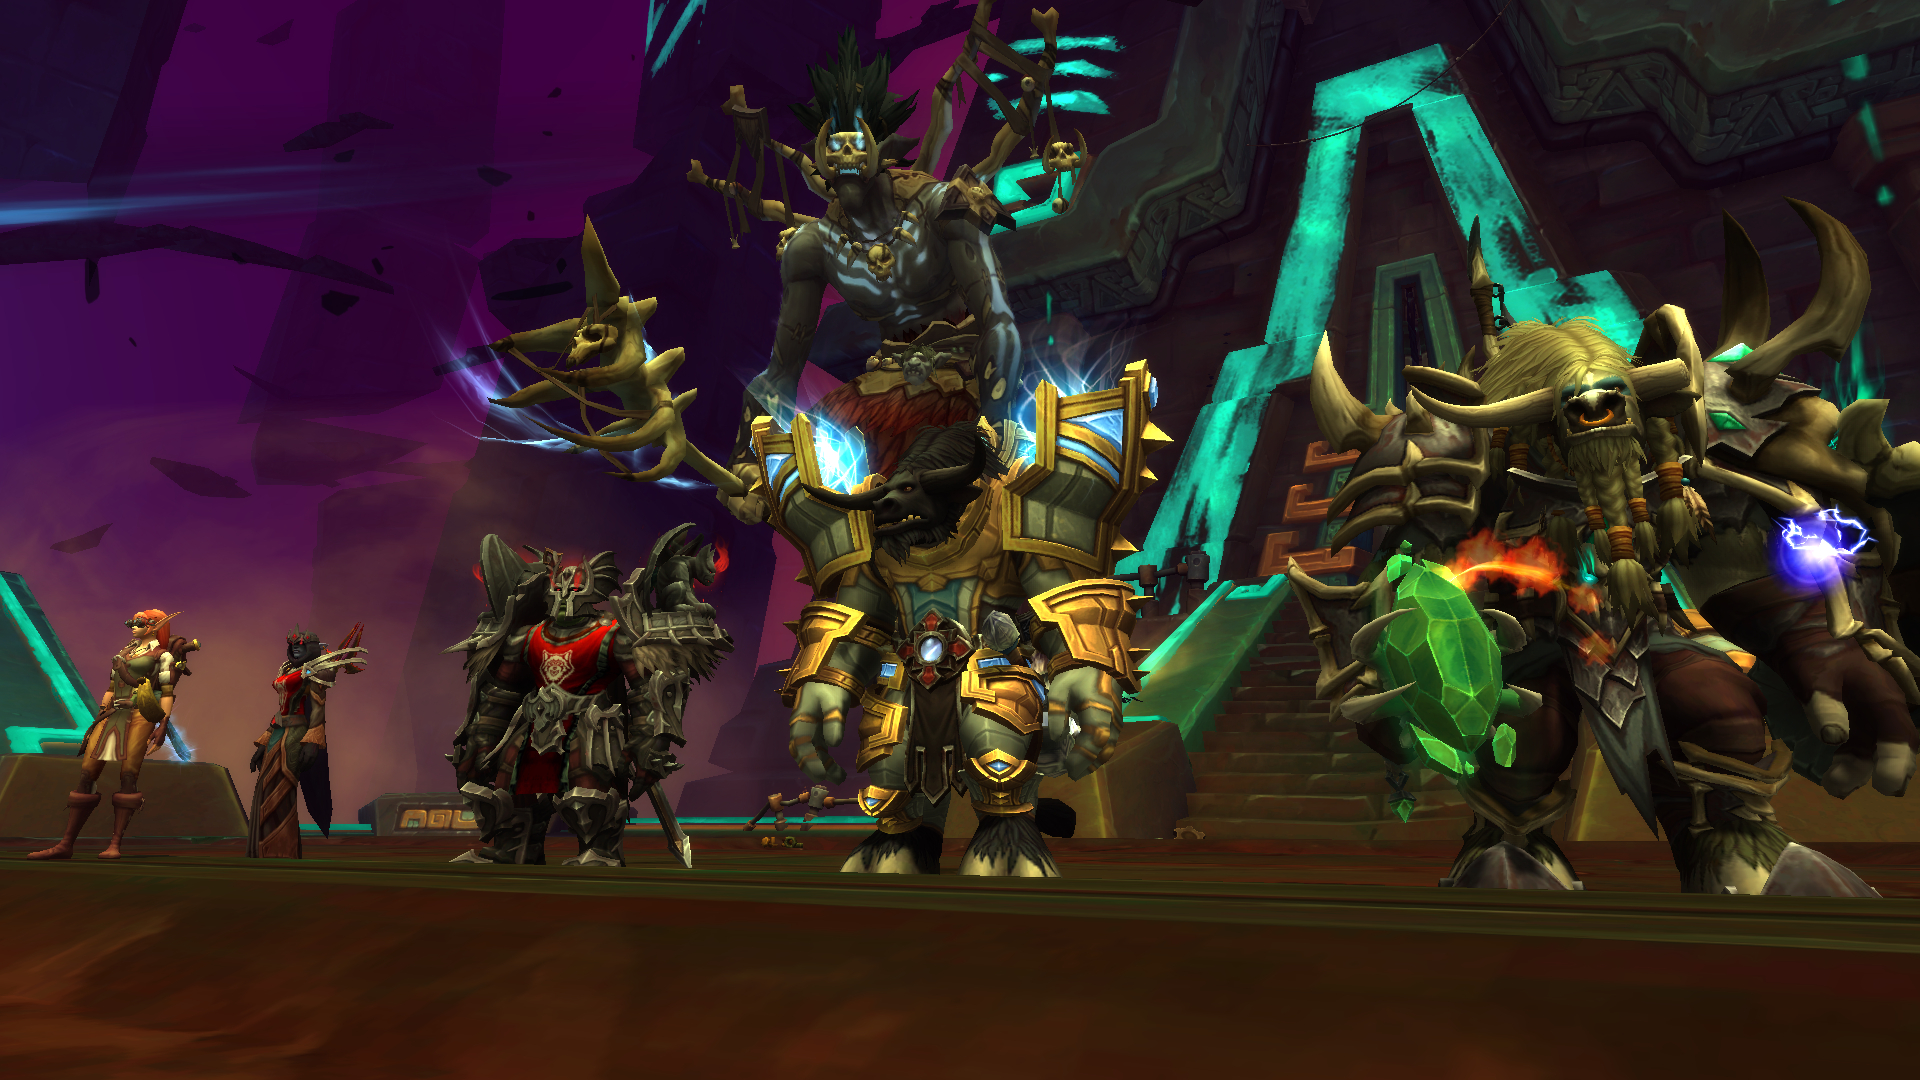 Dungeon group standing in front of Troll-god Bwonsamdi